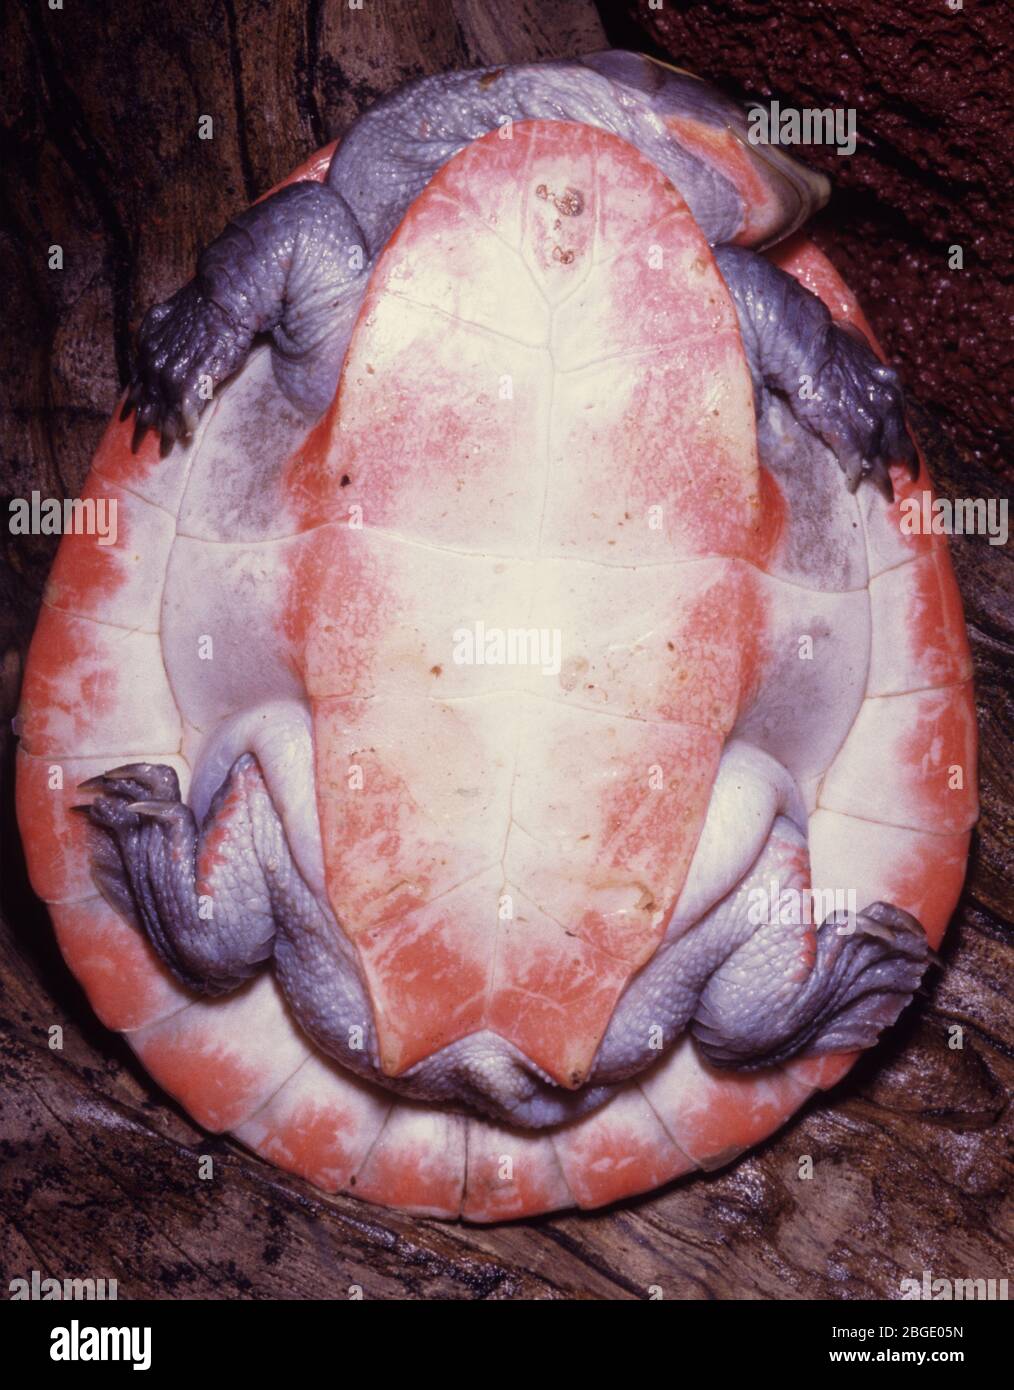 Ventral view (plastron) of red-bellied short-necked turtle (Emydura subglobosa), pink-bellied side-necked turtle, or Jardine River turtle Stock Photo